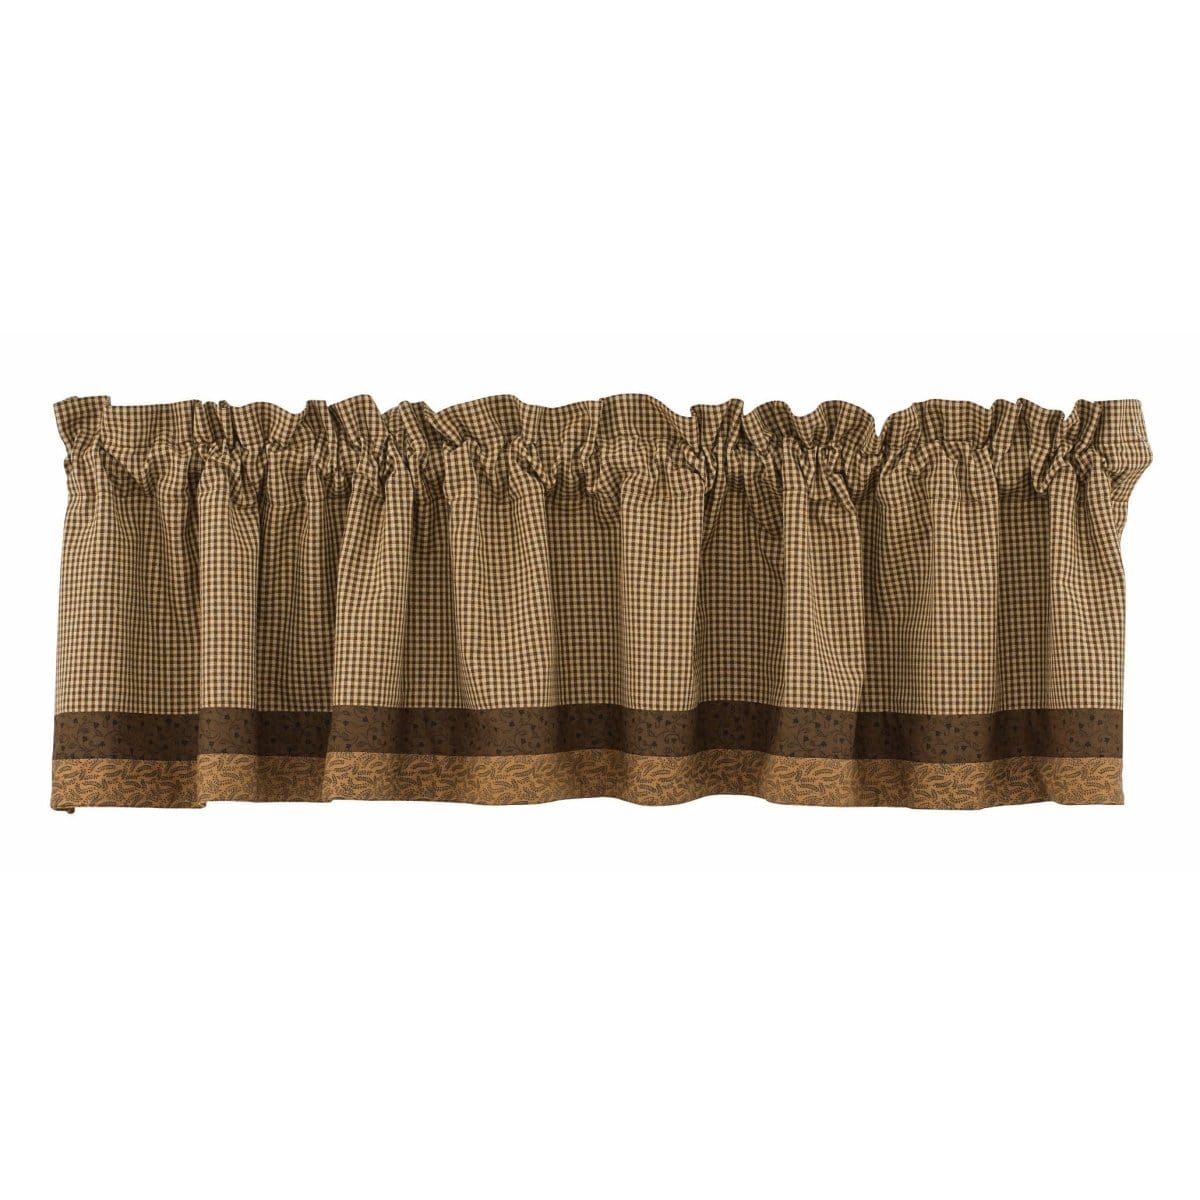 Shades Of Brown Border Valance Lined-Park Designs-The Village Merchant